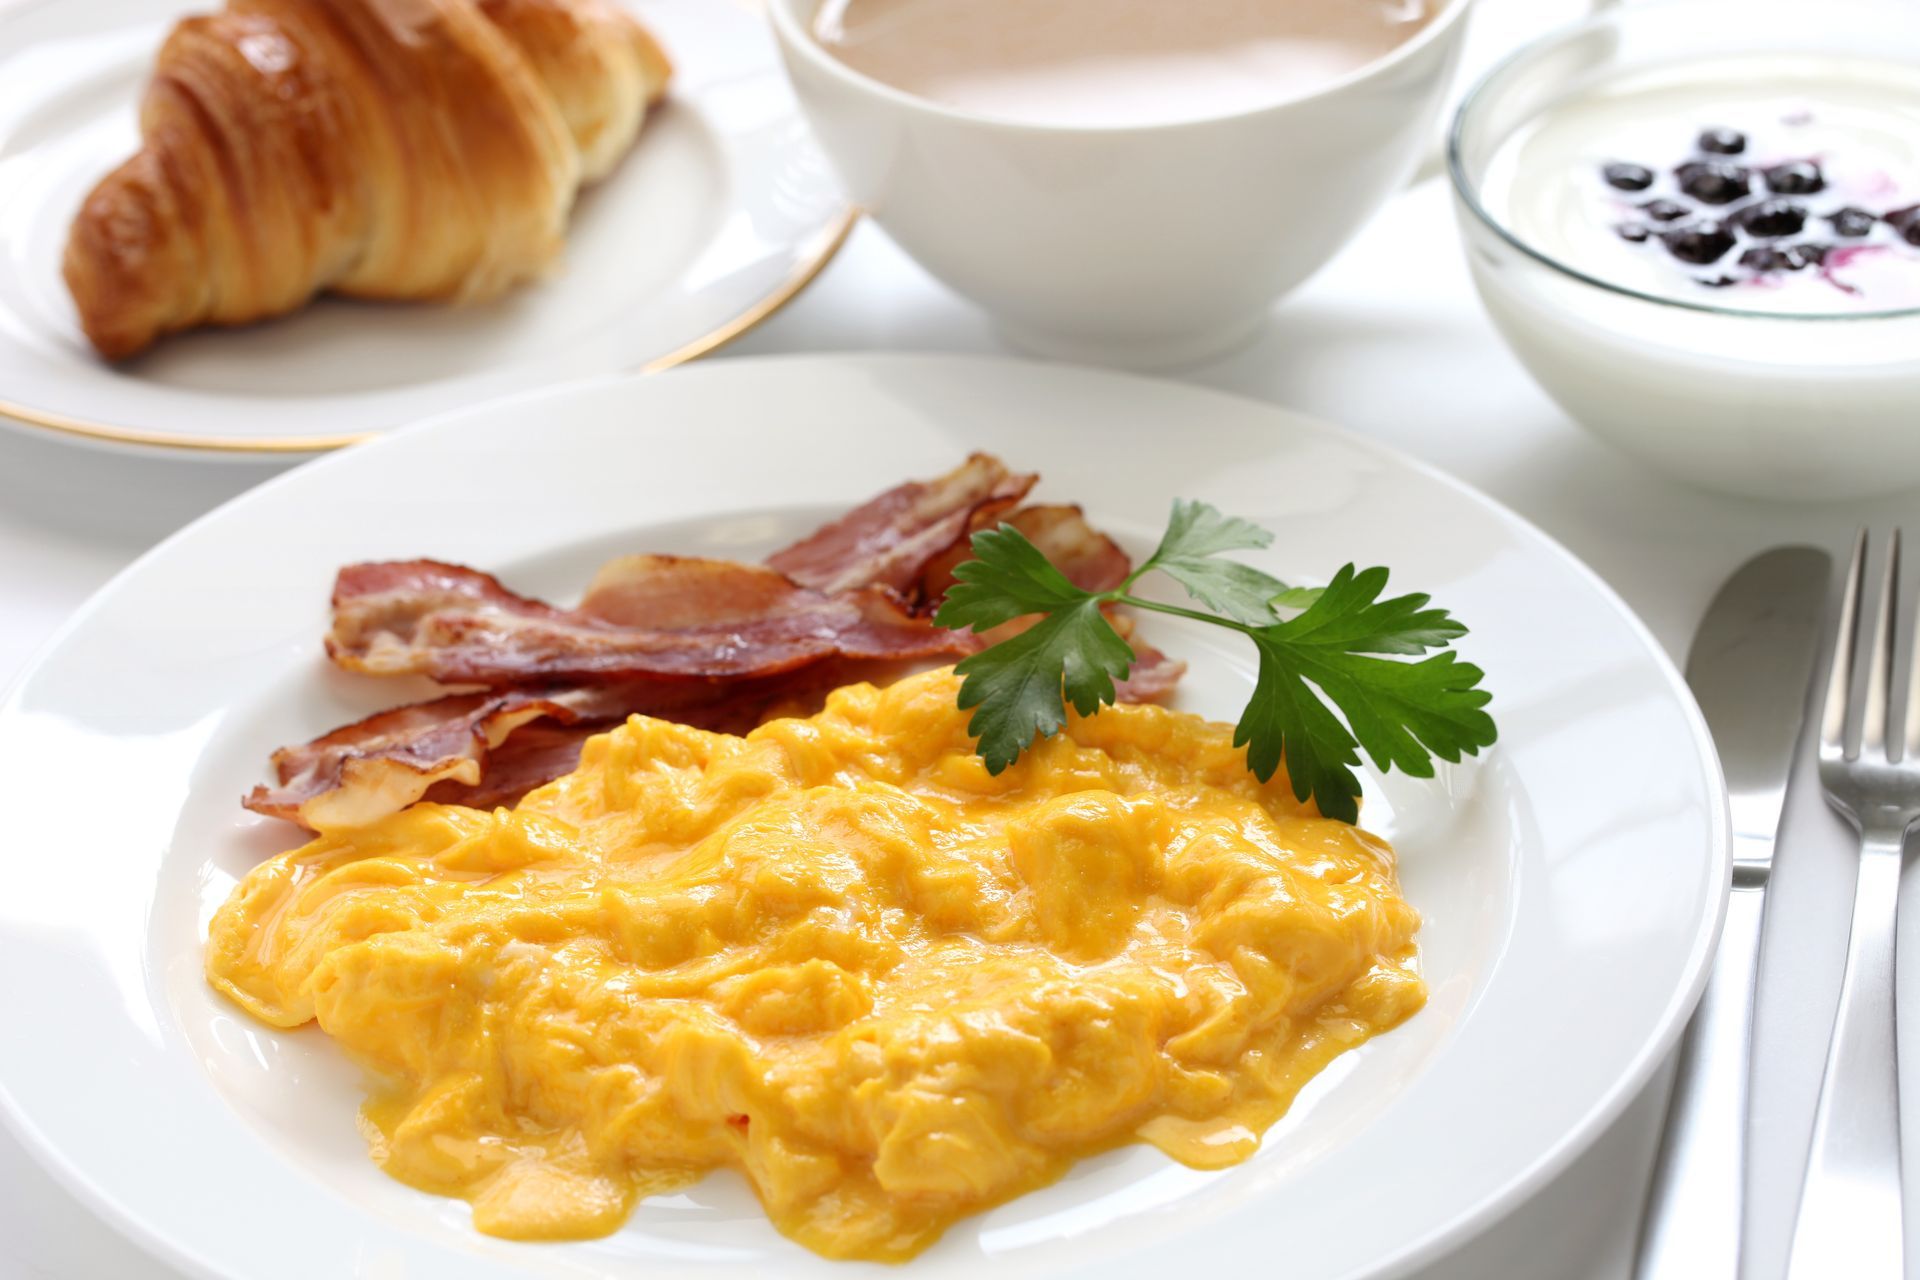 A plate of scrambled eggs with bacon and a croissant